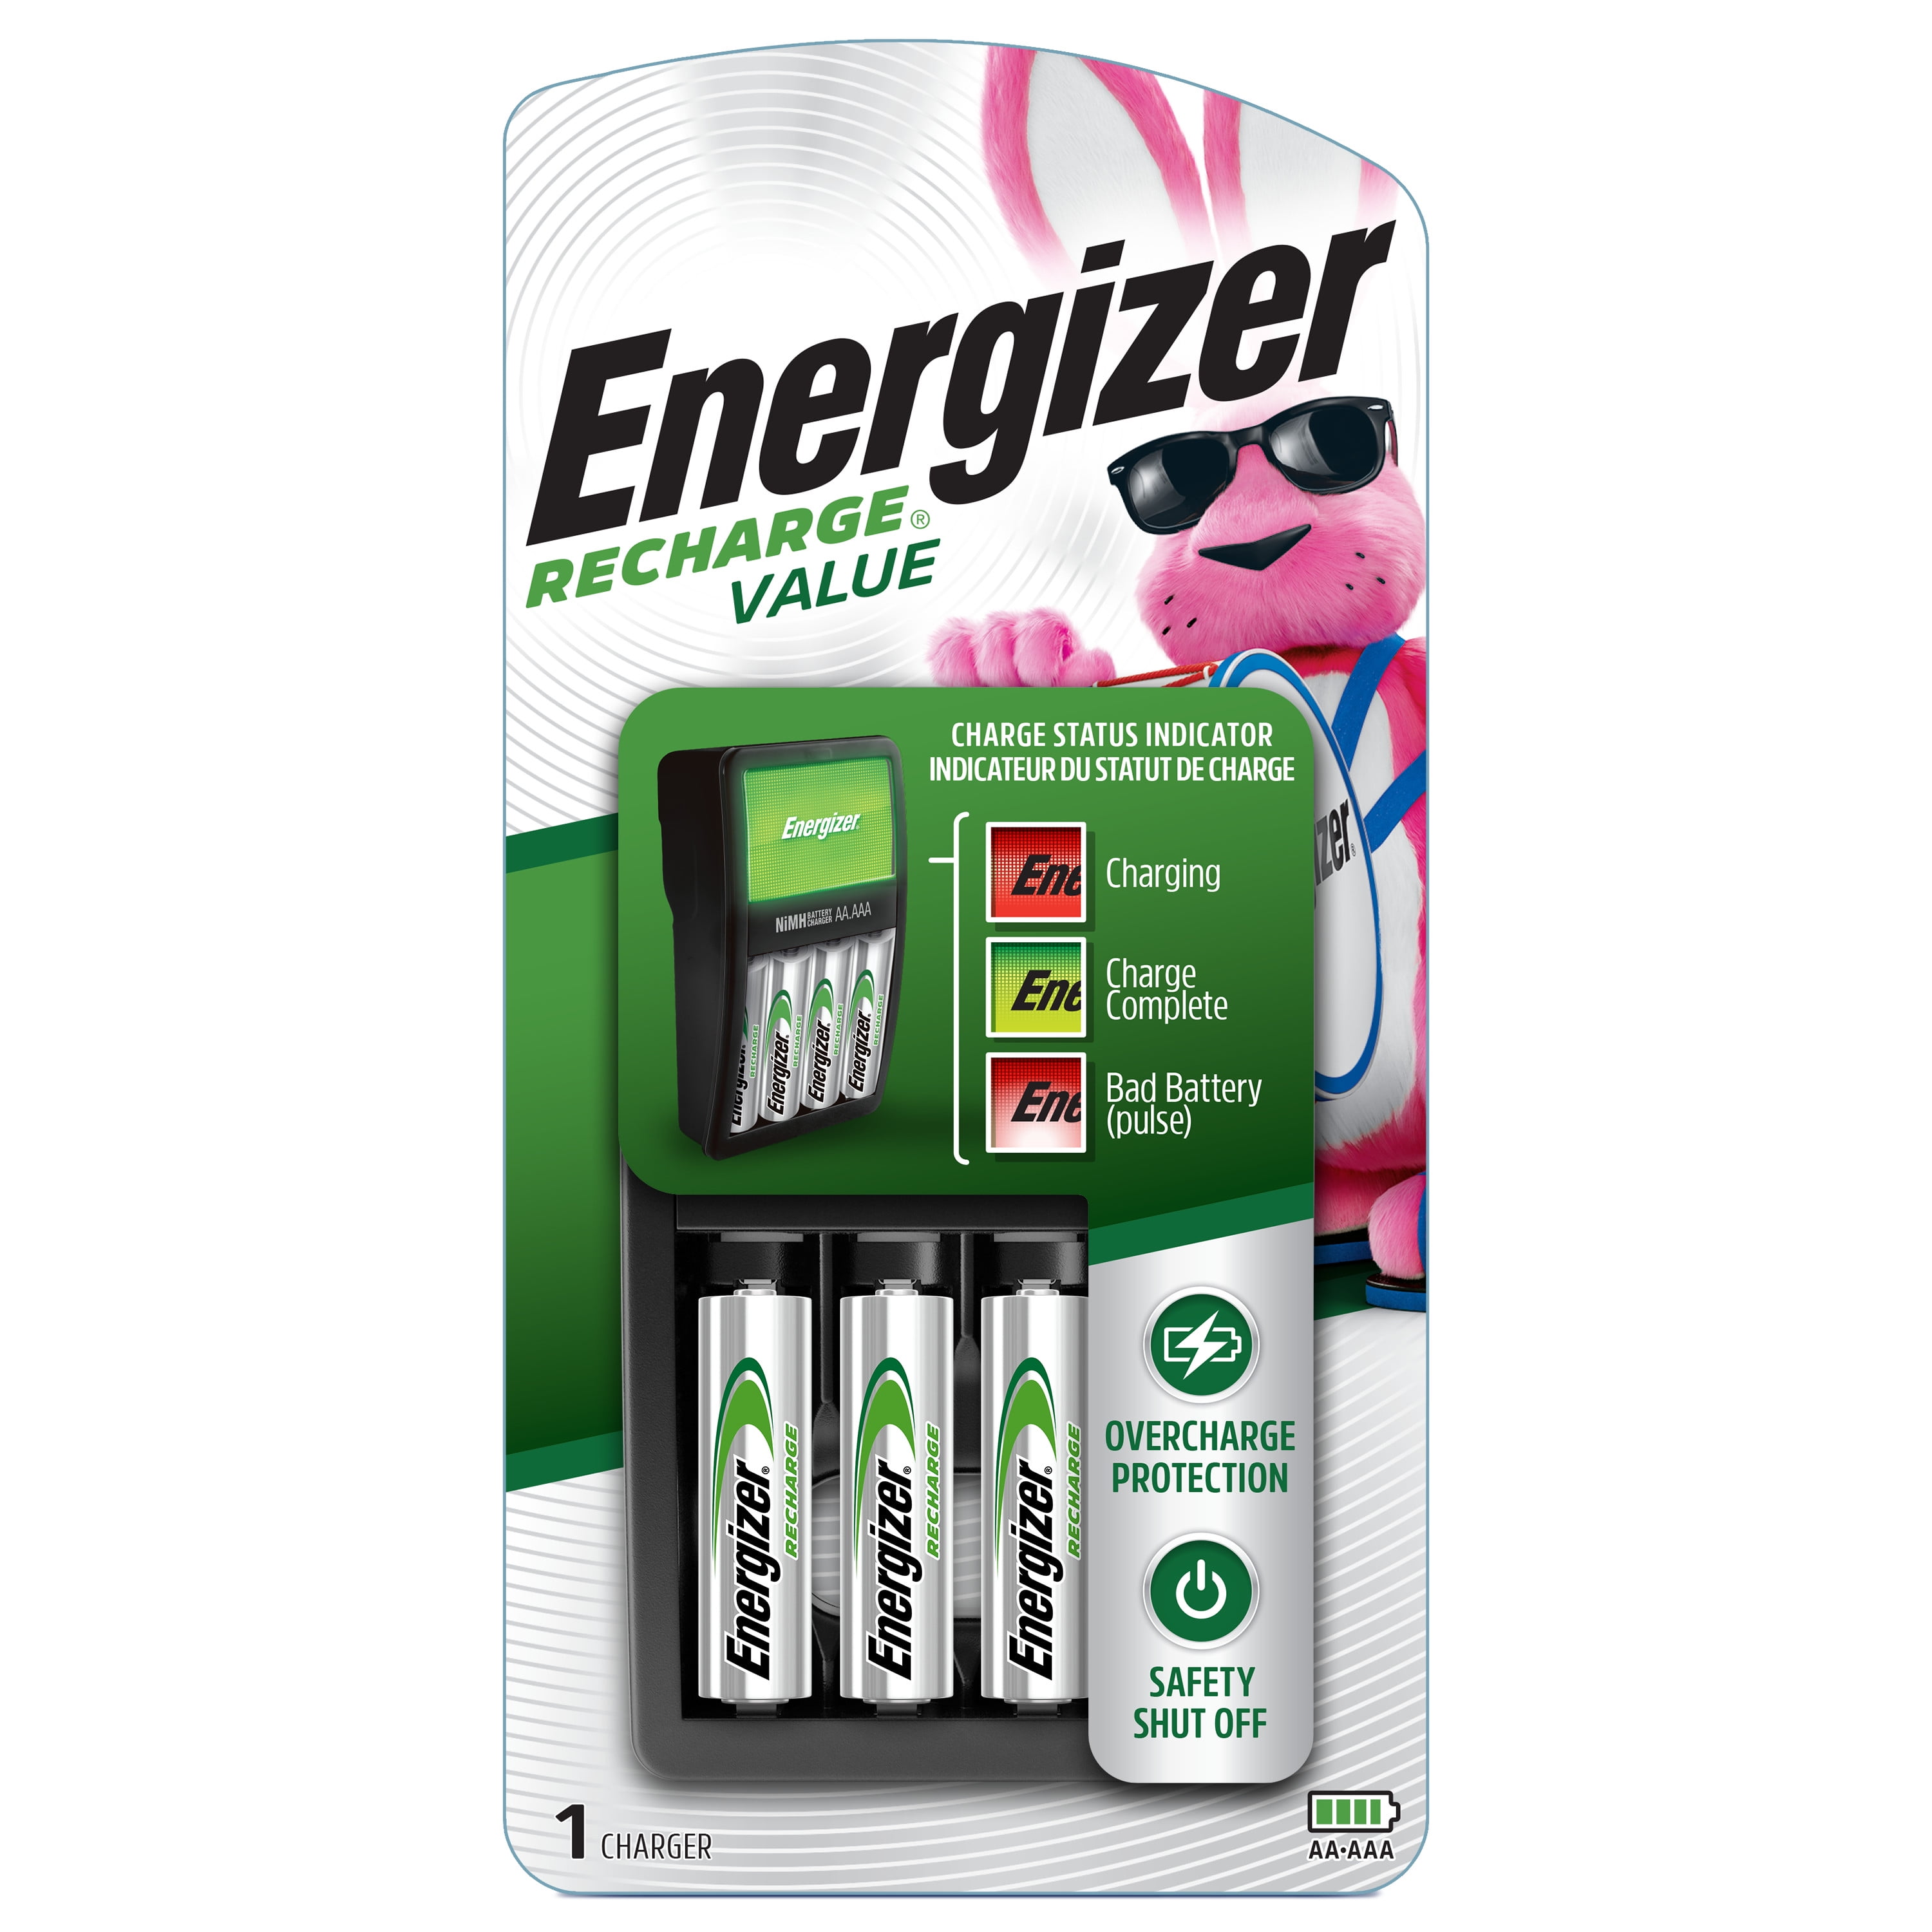 24x AAA 12x 9v Energizer Max Alkaline E91/E92/E522 Batteries Made in USA Exp 2023 or later for AA and AAA and 5 years shelf life for 9v Batteries COMBO 24x AA Bulk Packaging 